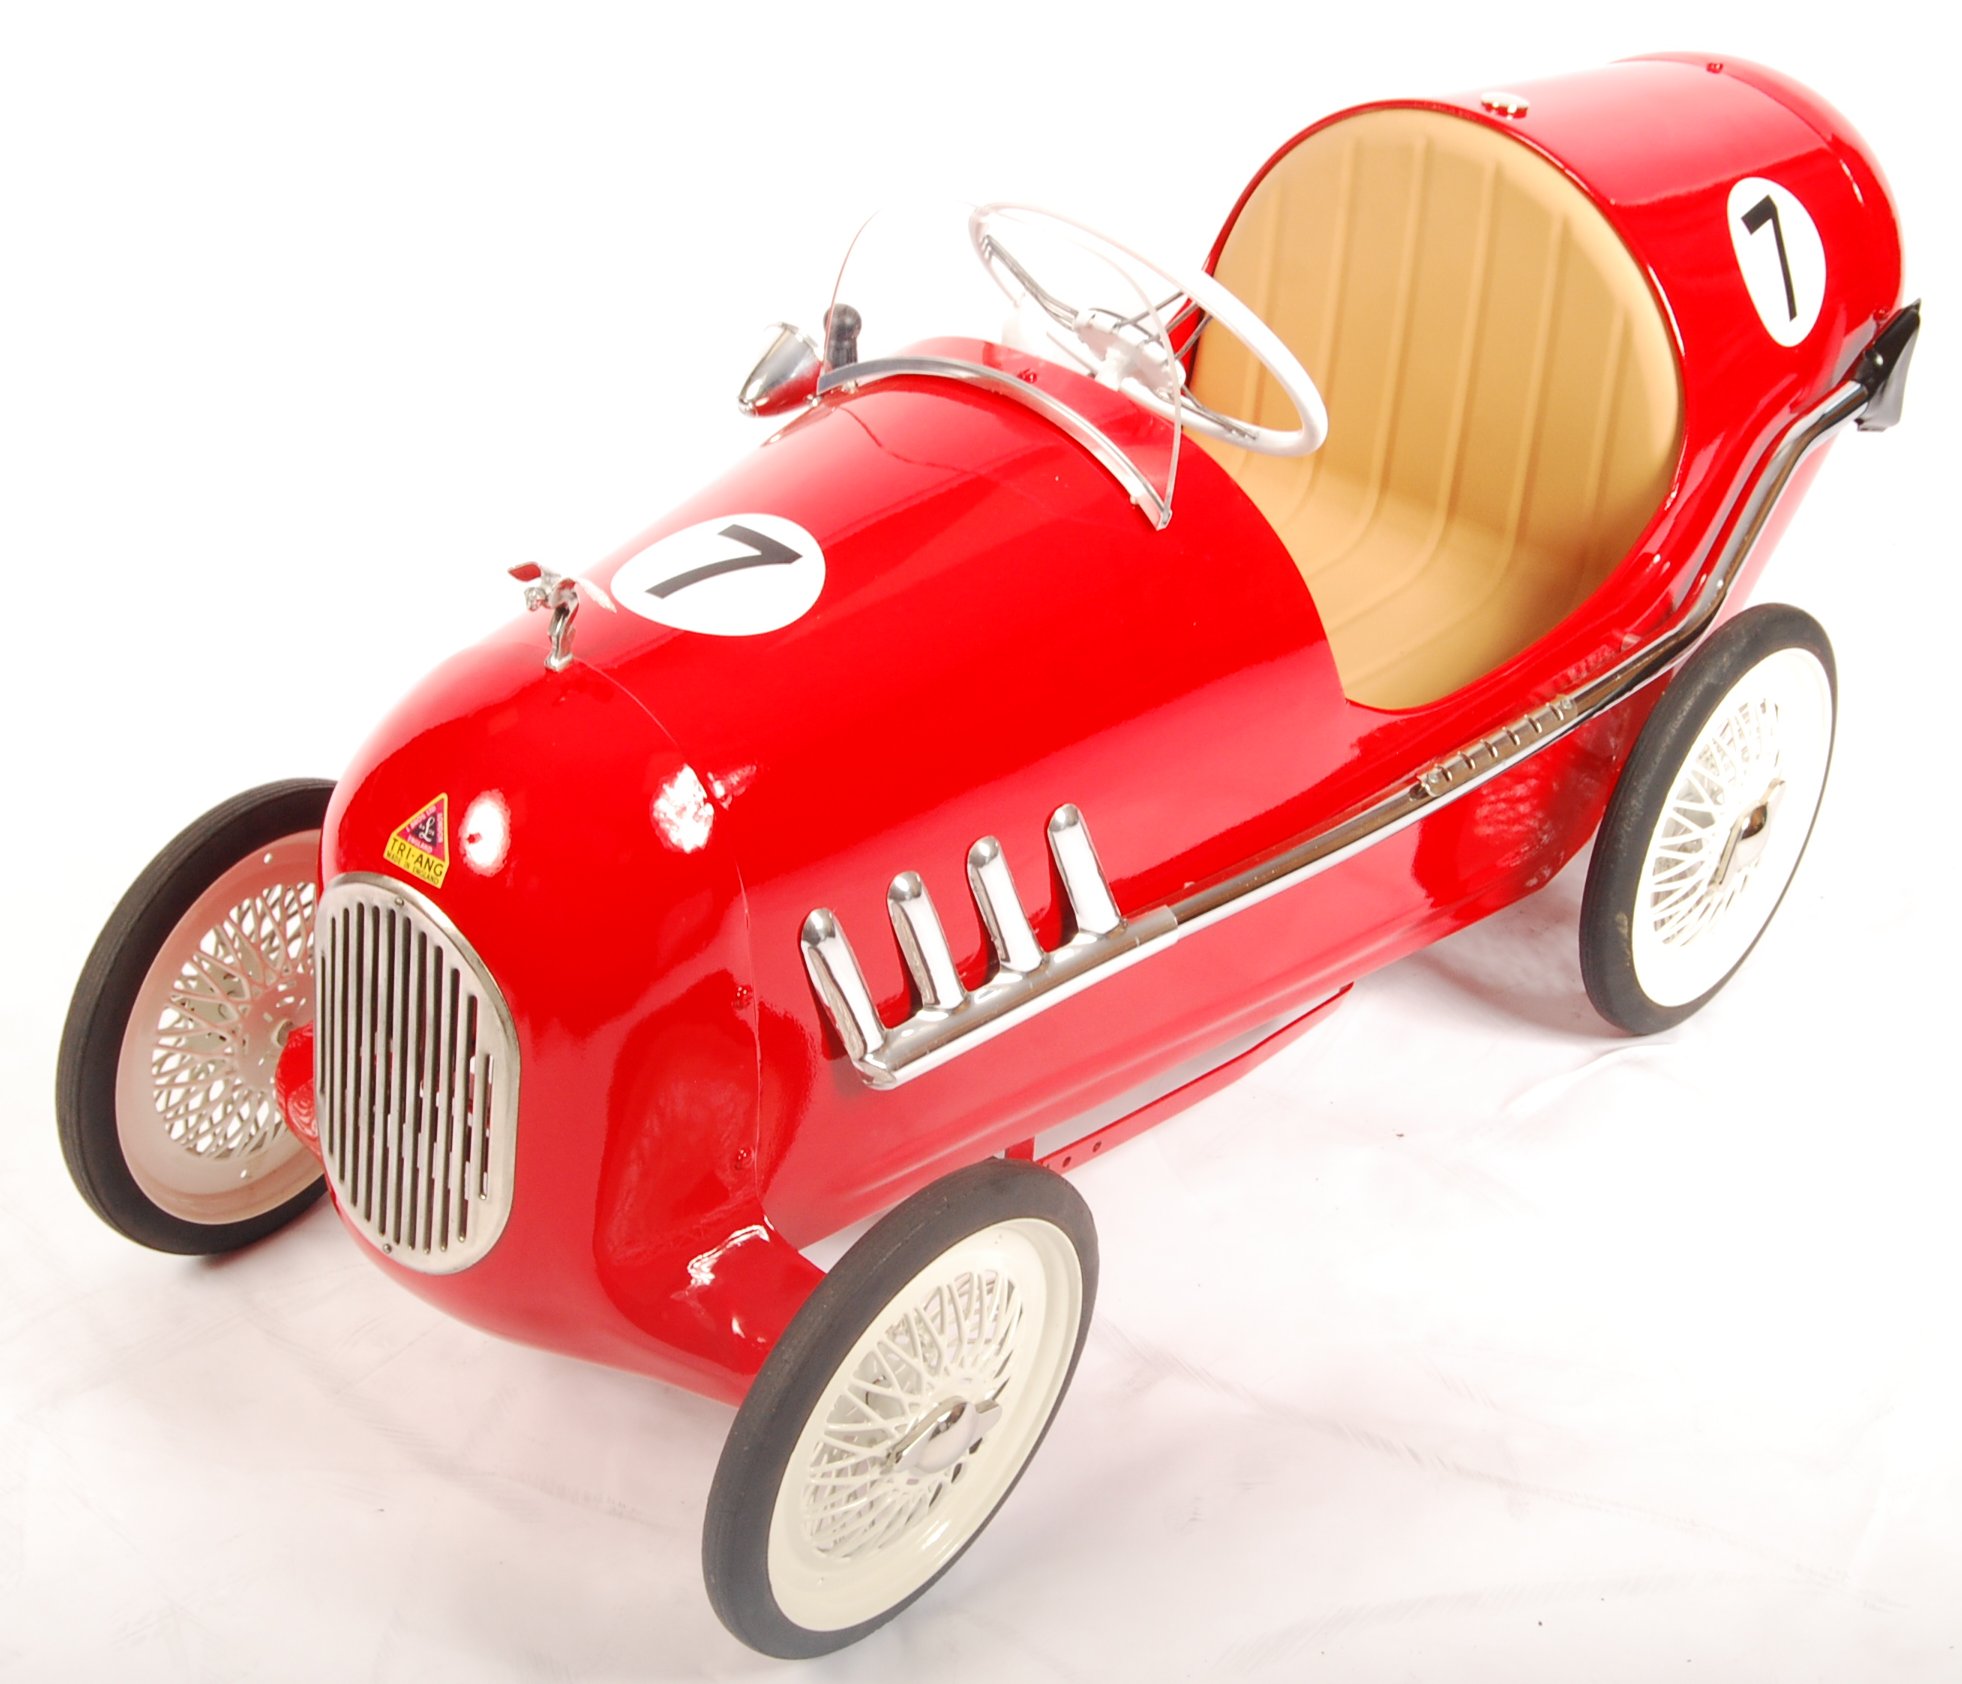 RARE VINTAGE 1960'S TRIANG RACER CHILD'S PEDAL CAR IN RED - Image 2 of 9